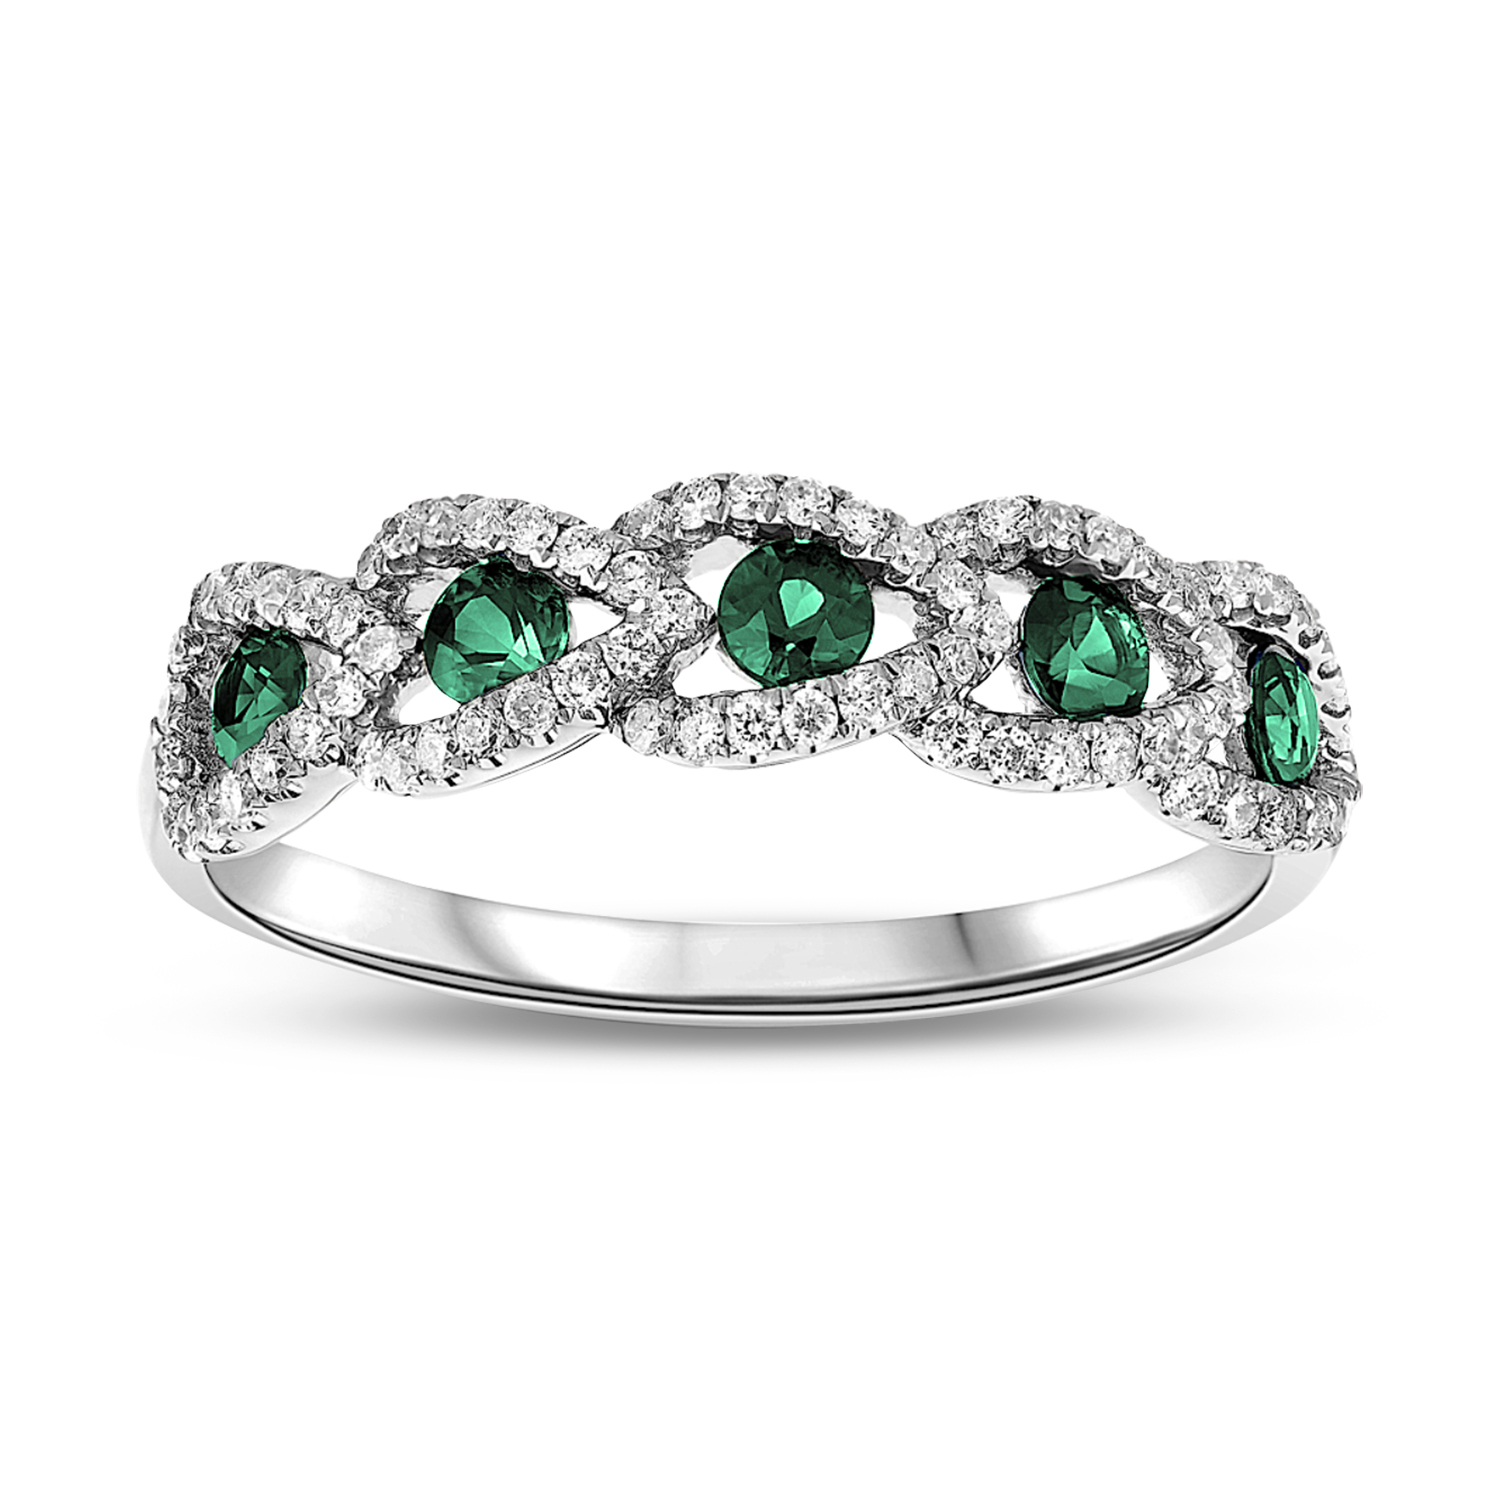 View 0.20ctw Diamond and Emerald Wedding Band in 18k Gold